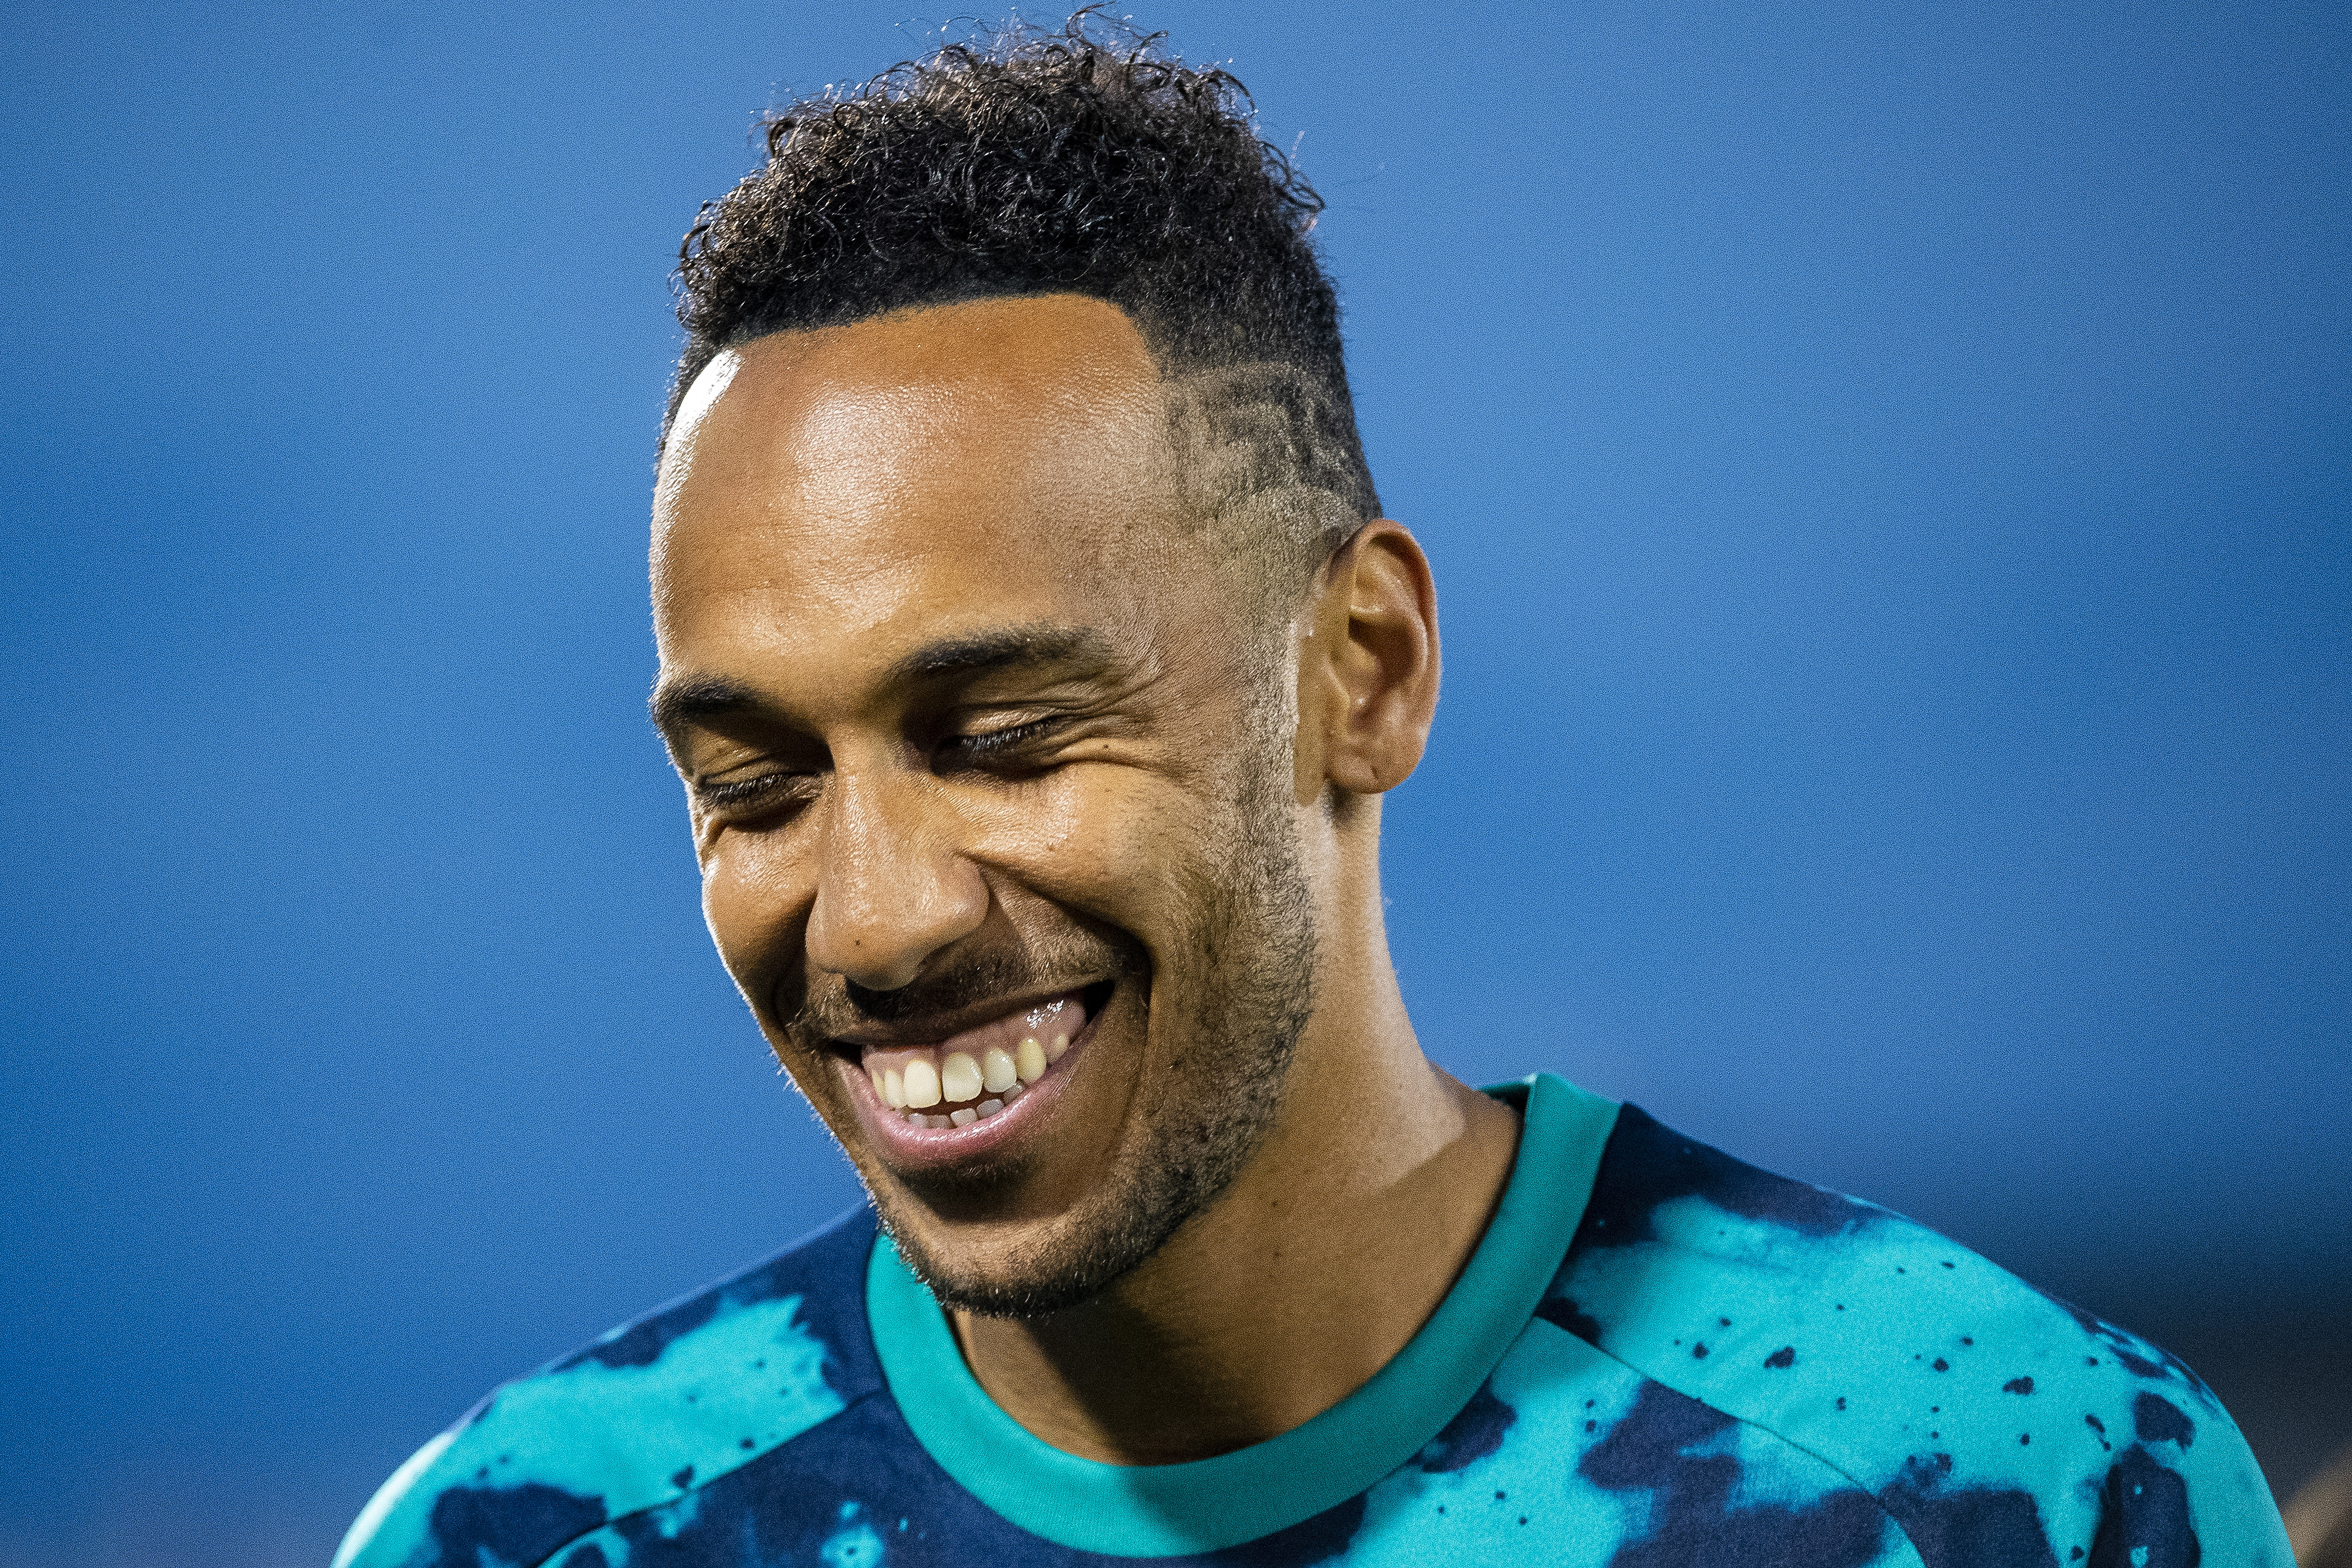 COMMERCE CITY, CO - JULY 15: Pierre-Emerick Aubameyang #14 of Arsenal smiles to fans during the second half against the Colorado Rapids at Dick's Sporting Goods Park on July 15, 2019 in Commerce City, Colorado. (Photo by Timothy Nwachukwu/Getty Images)